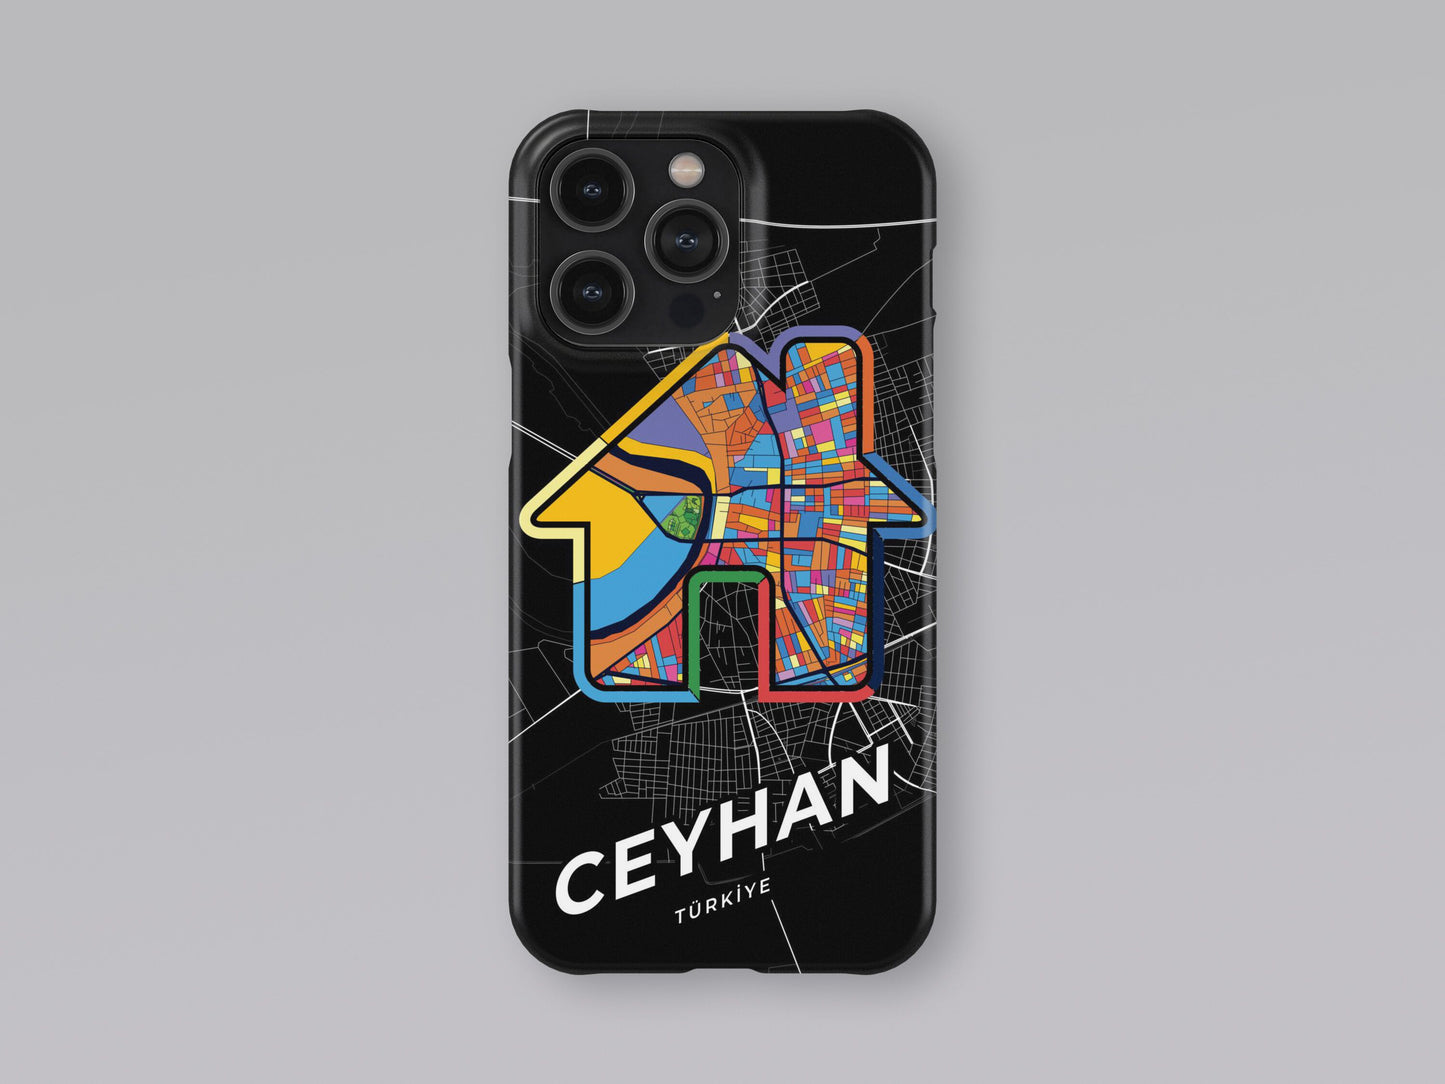 Ceyhan Turkey slim phone case with colorful icon. Birthday, wedding or housewarming gift. Couple match cases. 3